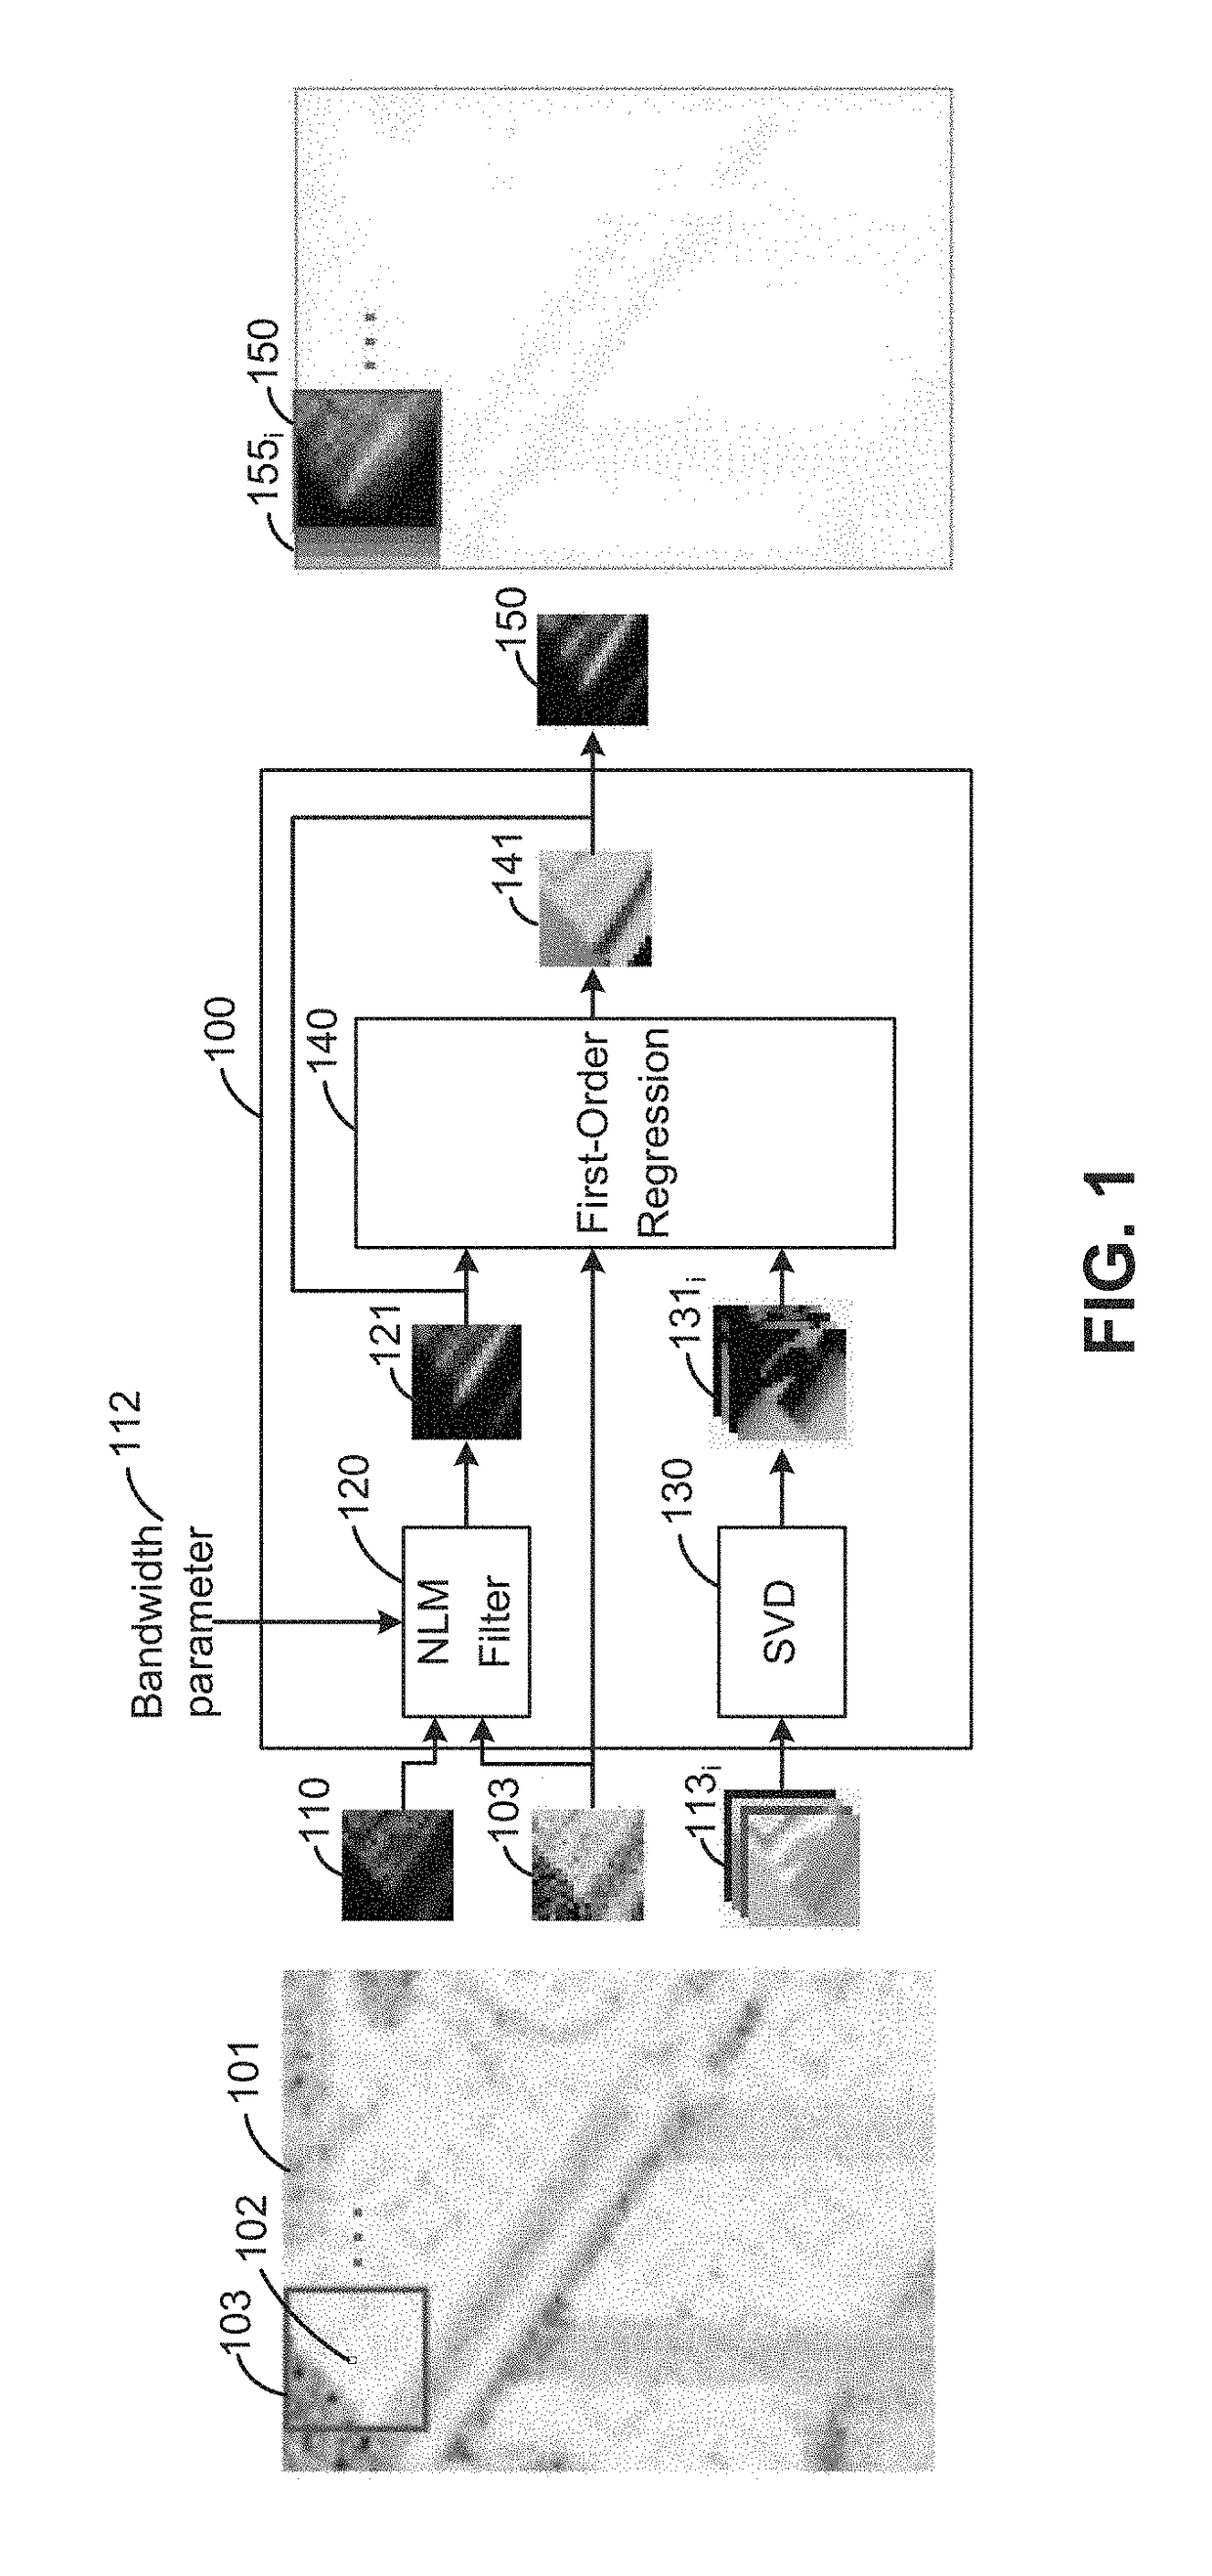 Robust regression method for image-space denoising